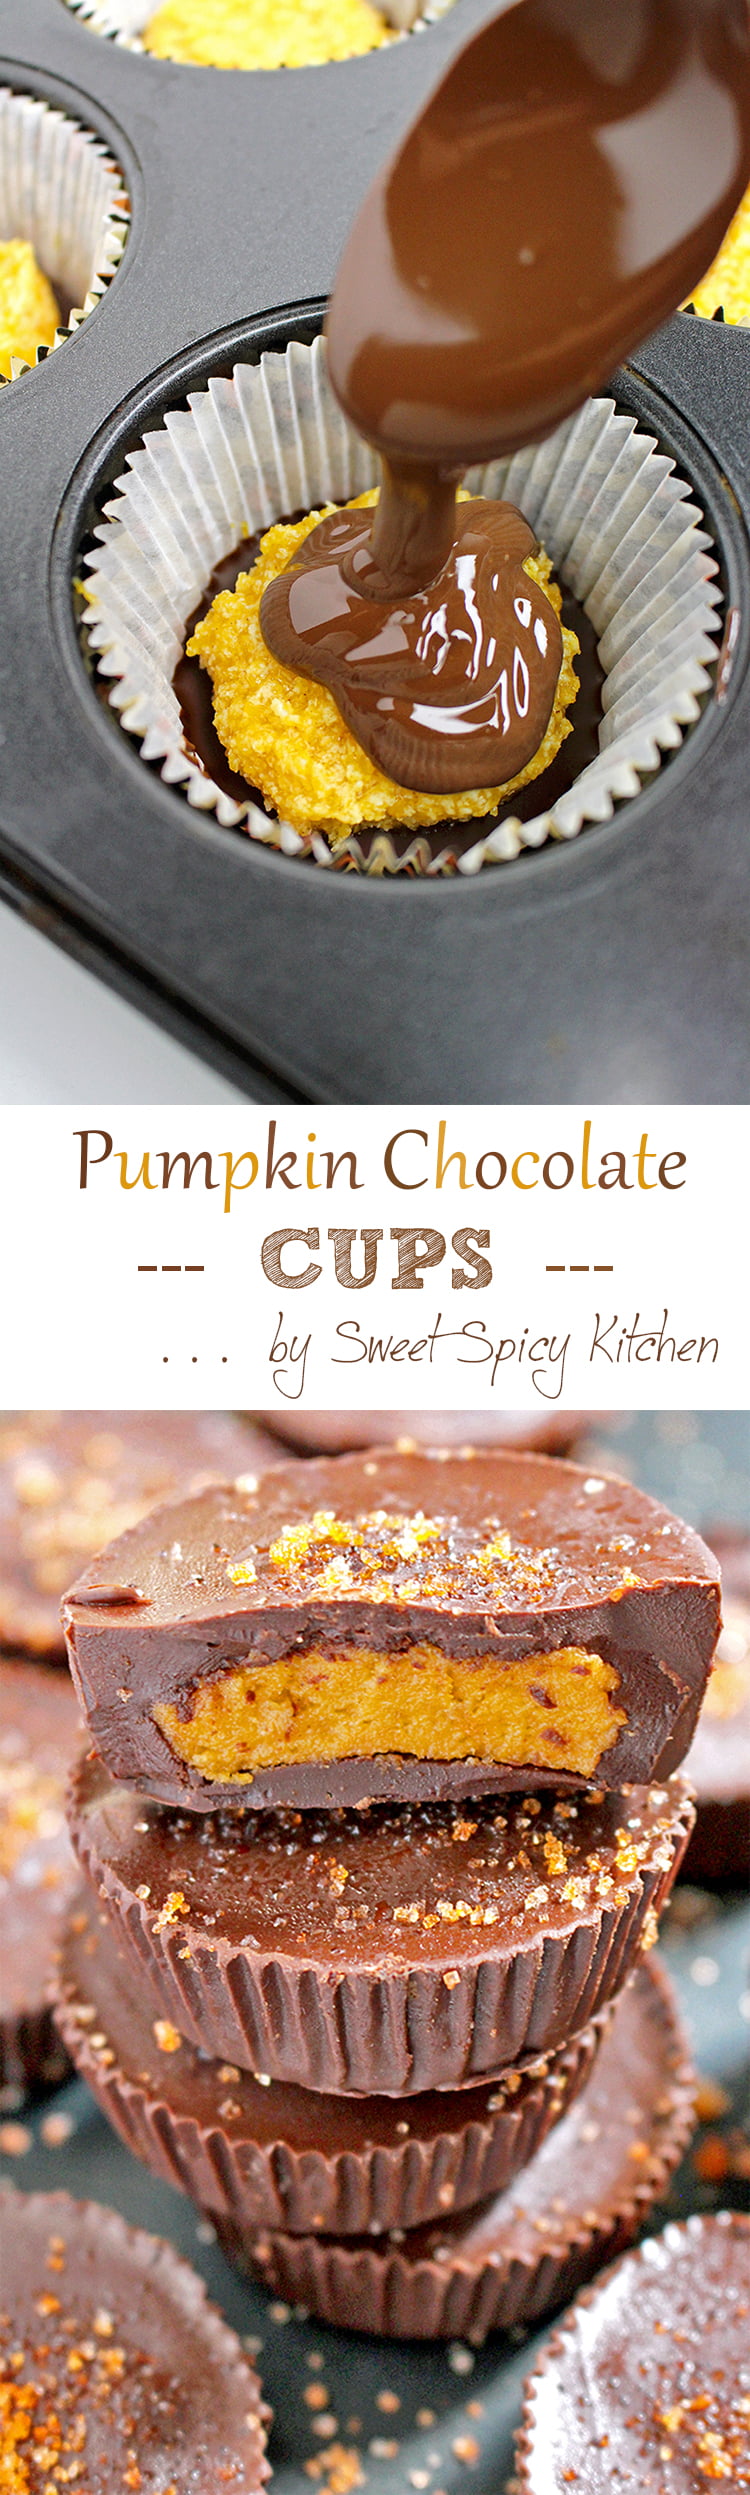 Untitled-000-Recovered Pumpkin Chocolate Cups